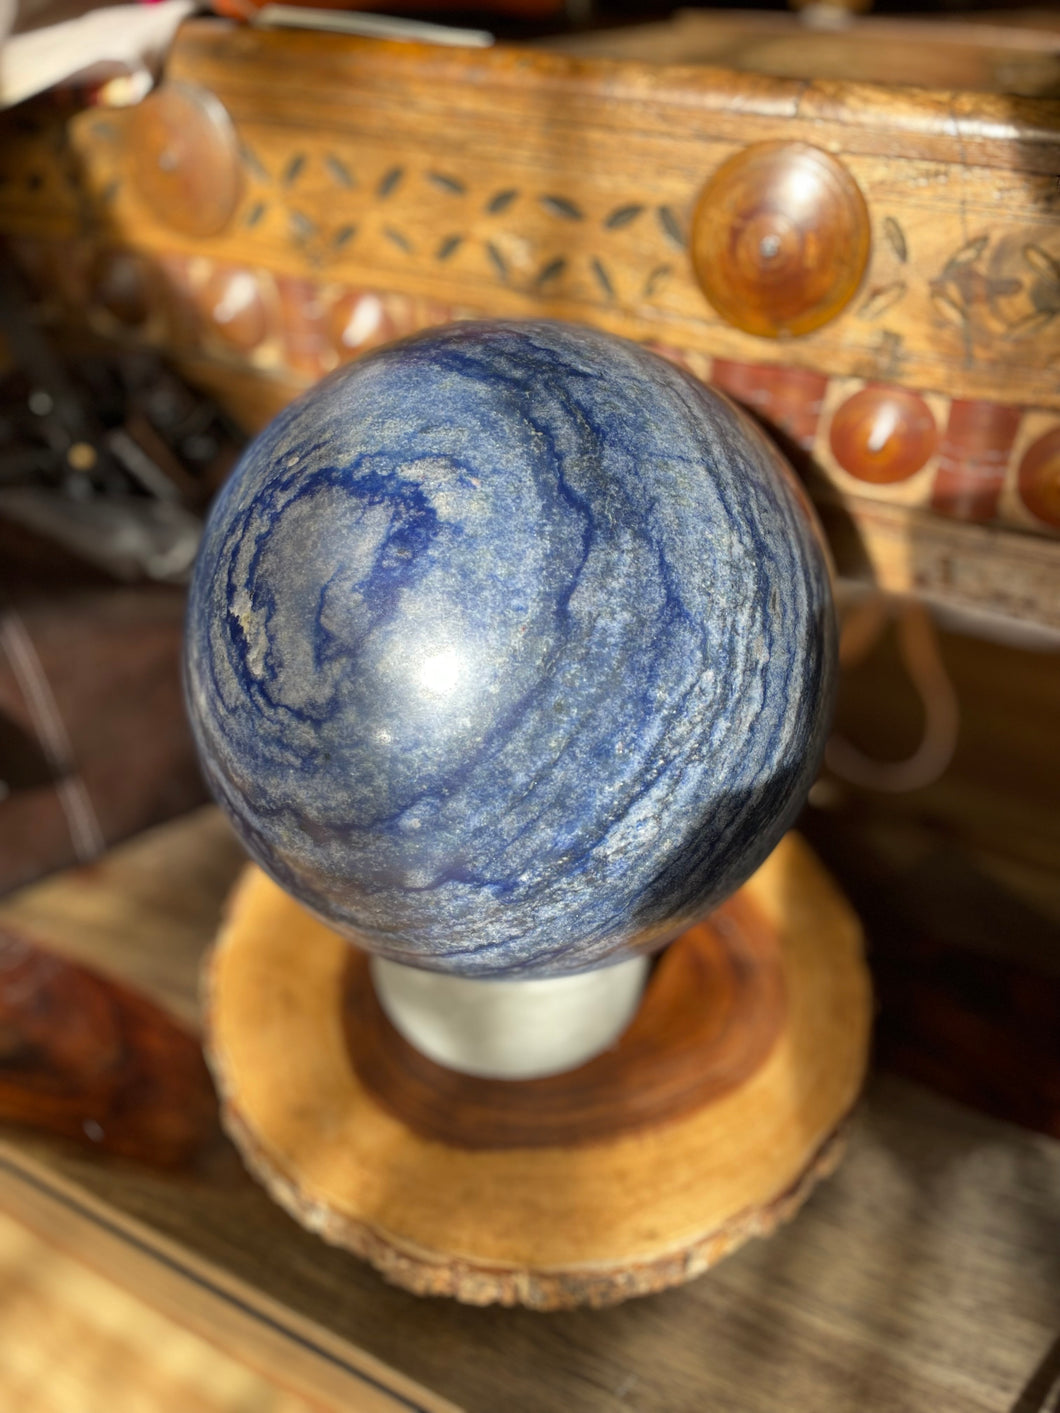 Dumortierite - On Sale - $360 with discount